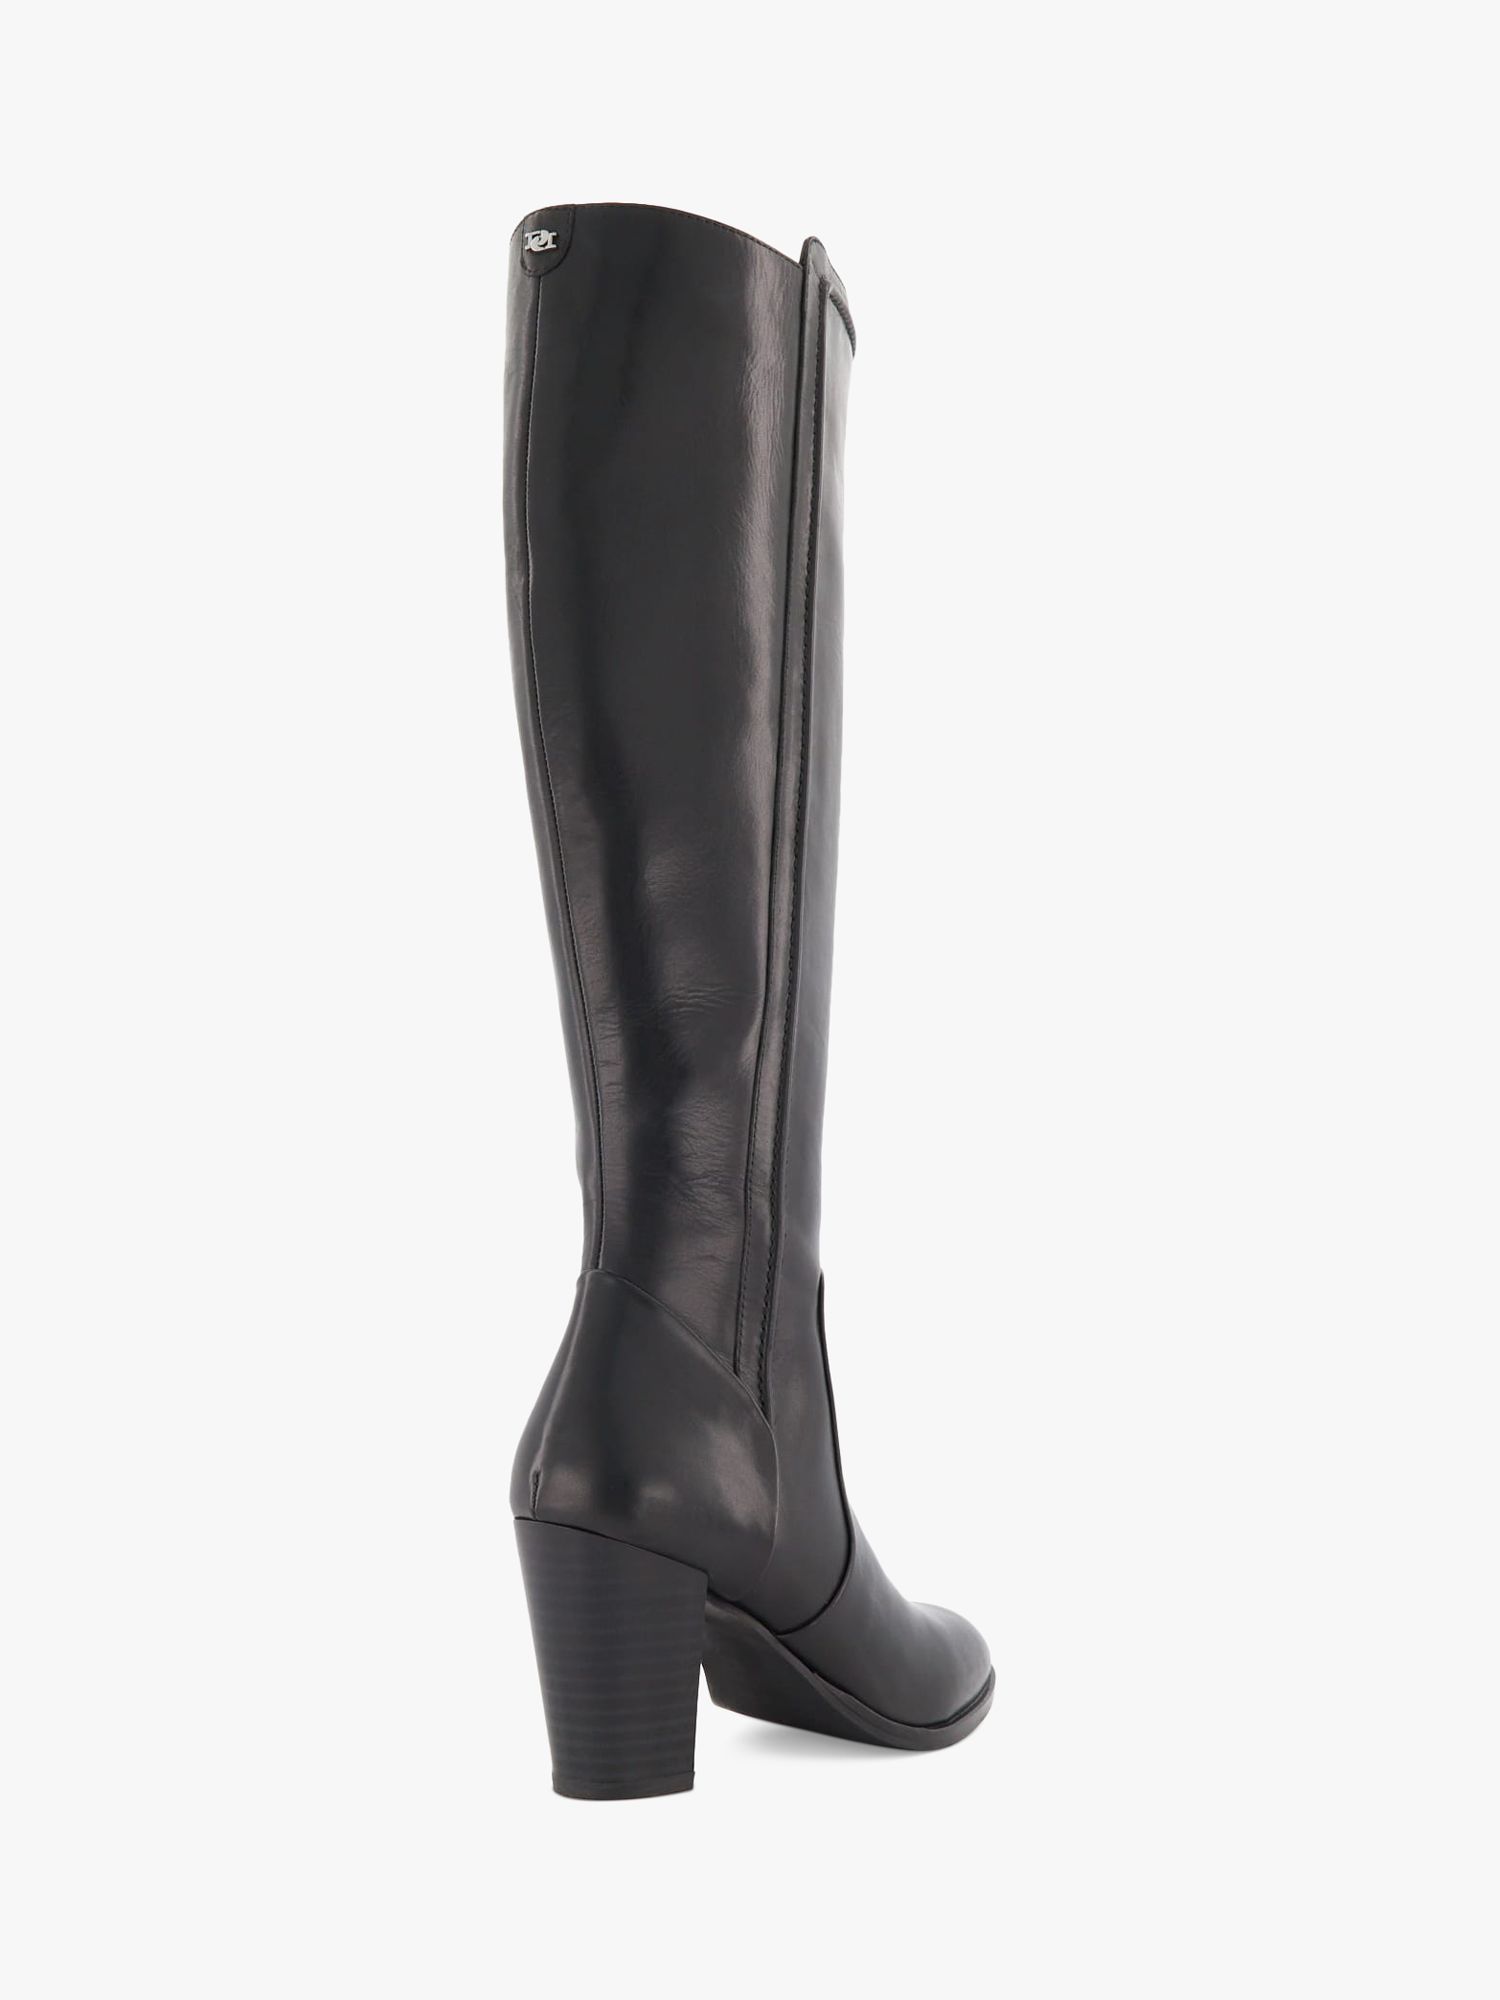 Buy Dune Tippy 2 Leather Knee High Boots, Black Online at johnlewis.com